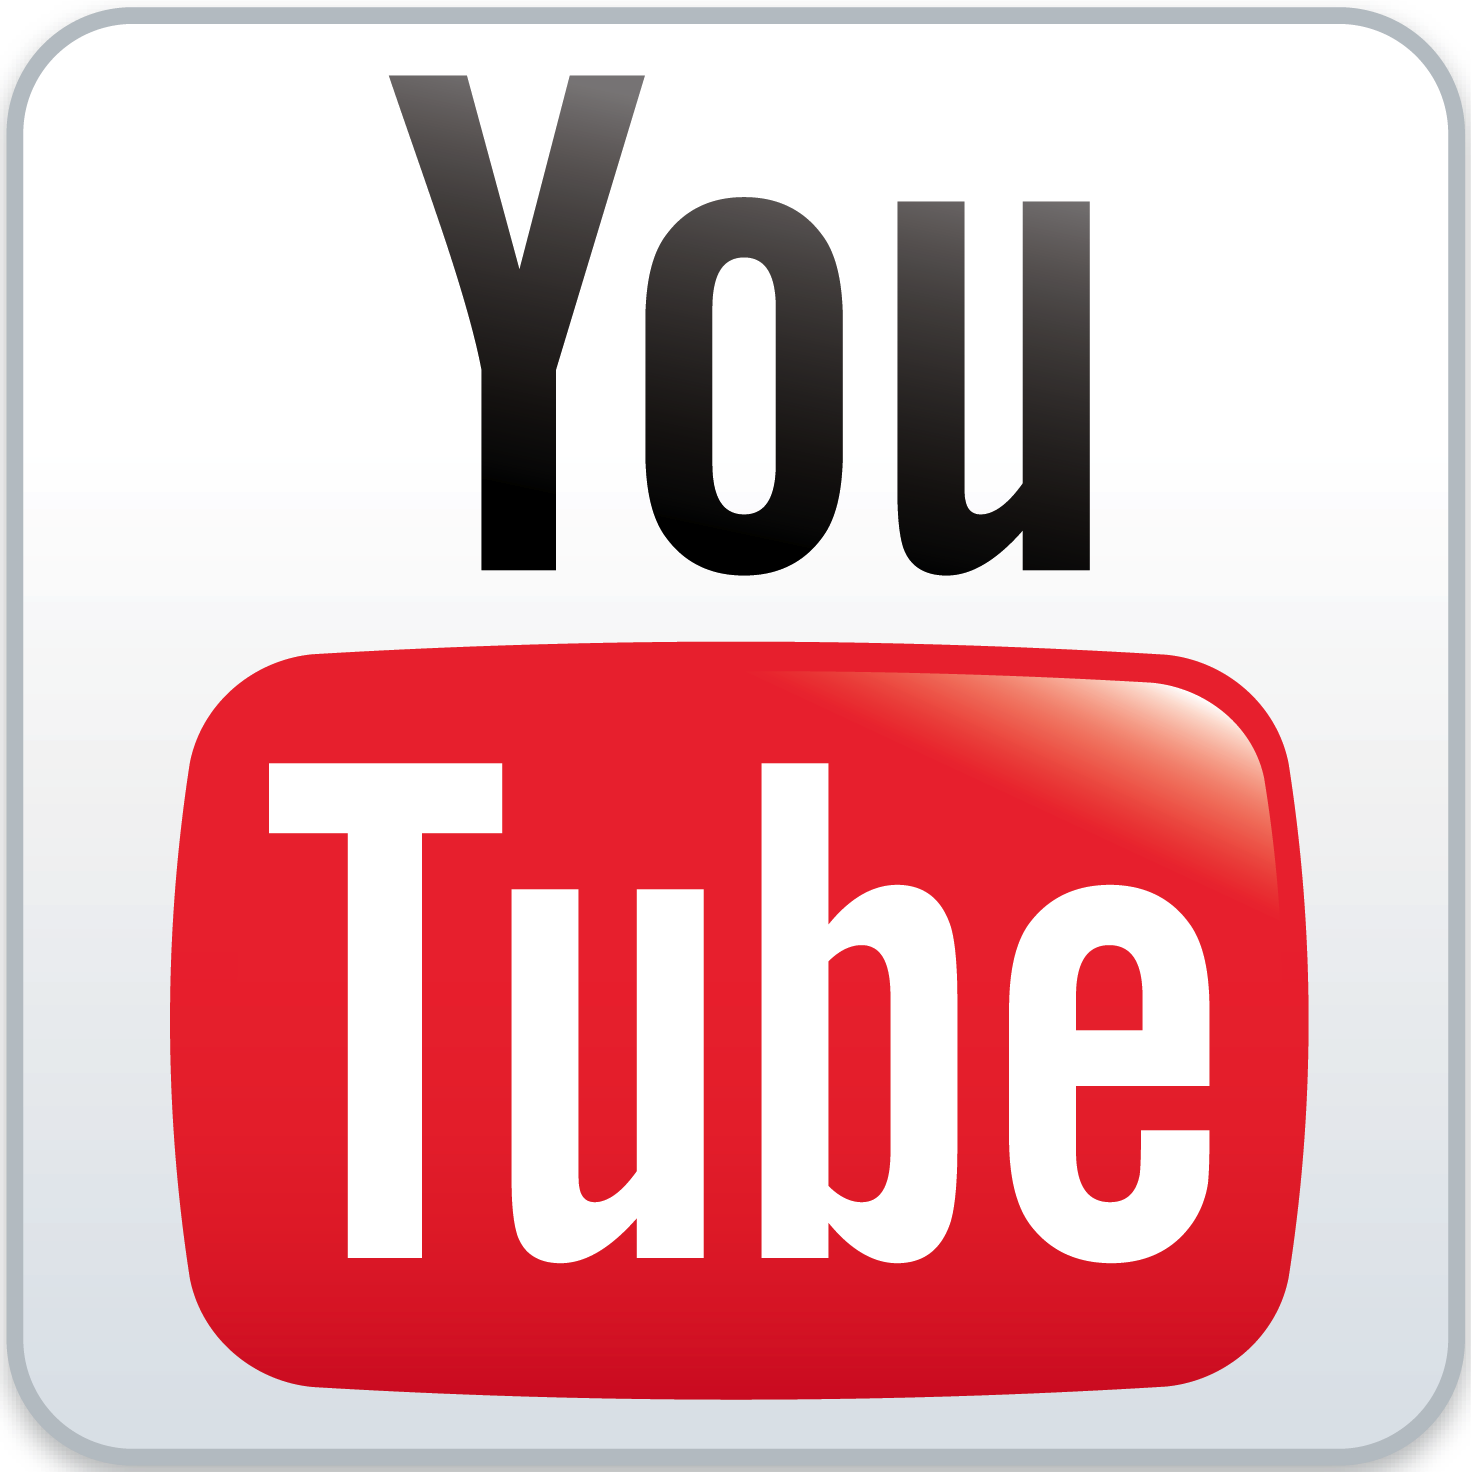 Our videos on Youtube